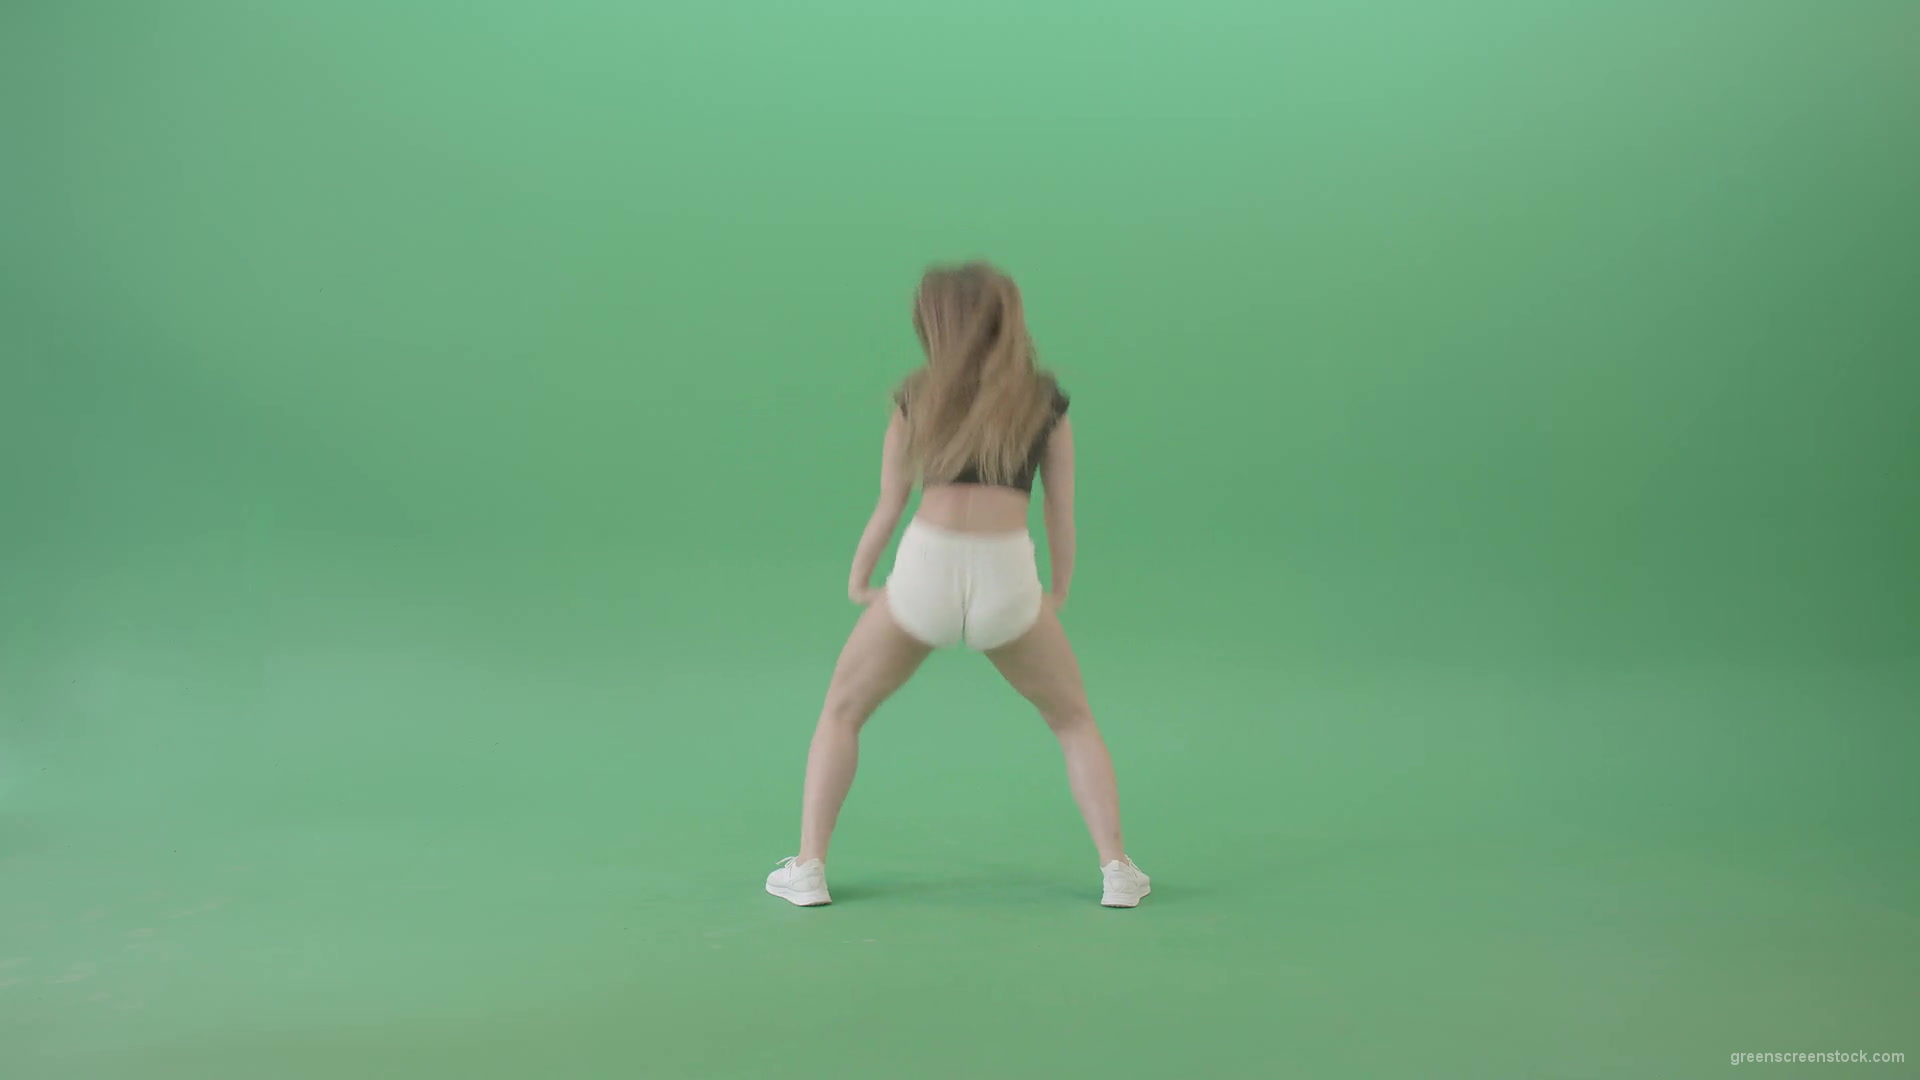 Beauty-girl-sрaking-ass-and-hips-dancing-Twerk-Afro-Dance-isolated-on-green-screen-4K-Video-Footage-1920_007 Green Screen Stock